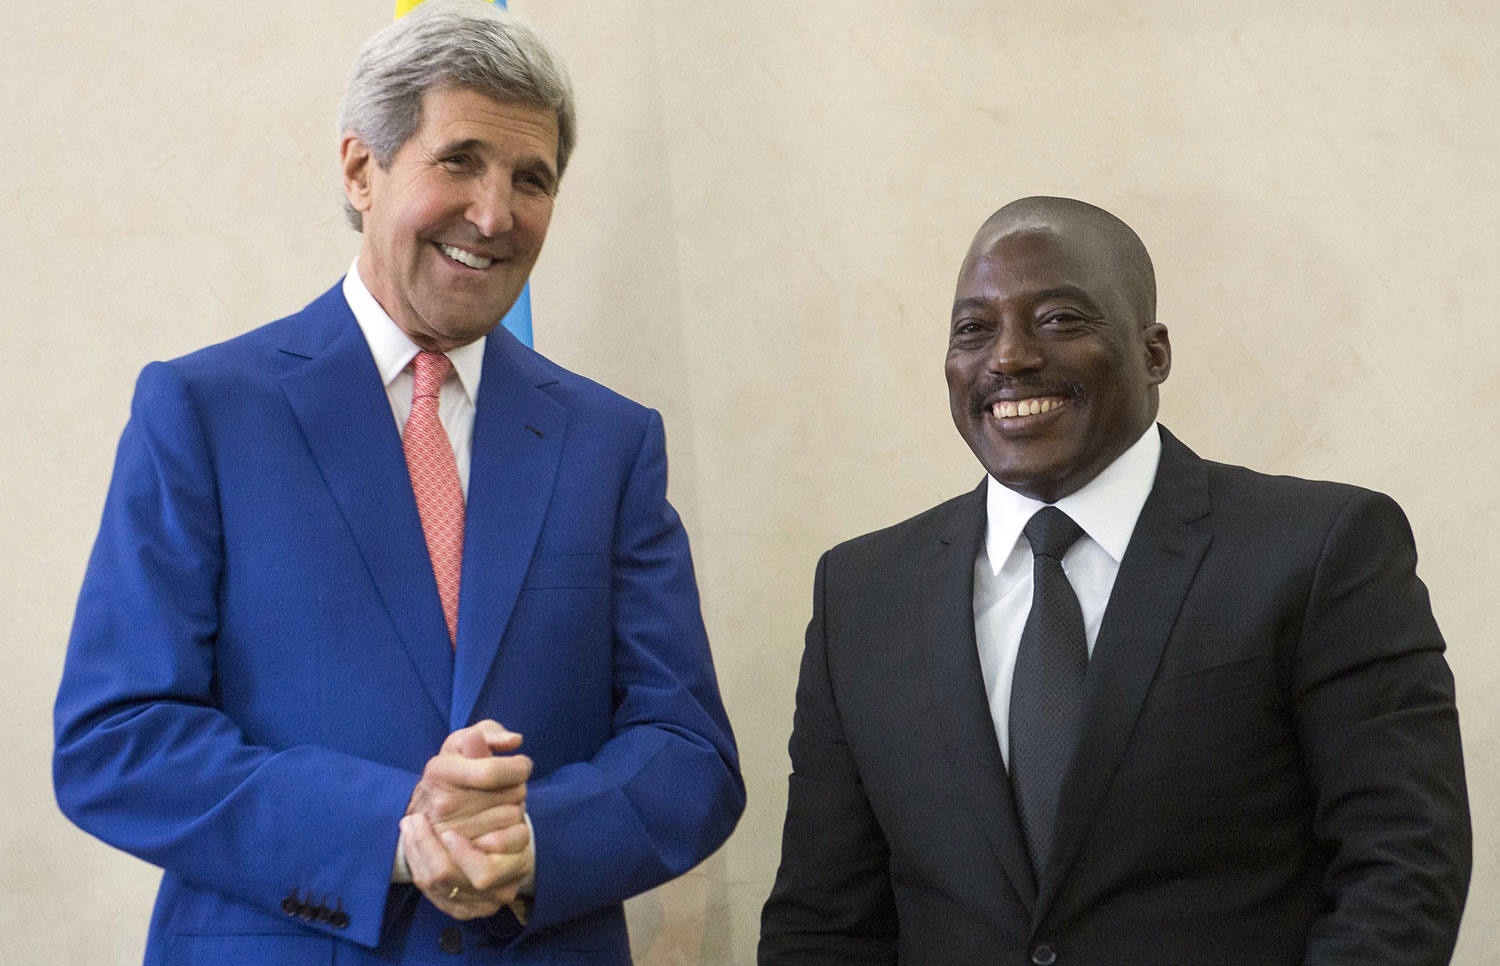 The President of the Democratic Republic of Congo Joseph Kabila, right, welcomes US Secretary of State John Kerry at the Palais de la Nation in Kinshasa on May 4, 2014. (Saul Loeb—AFP/Getty Images)